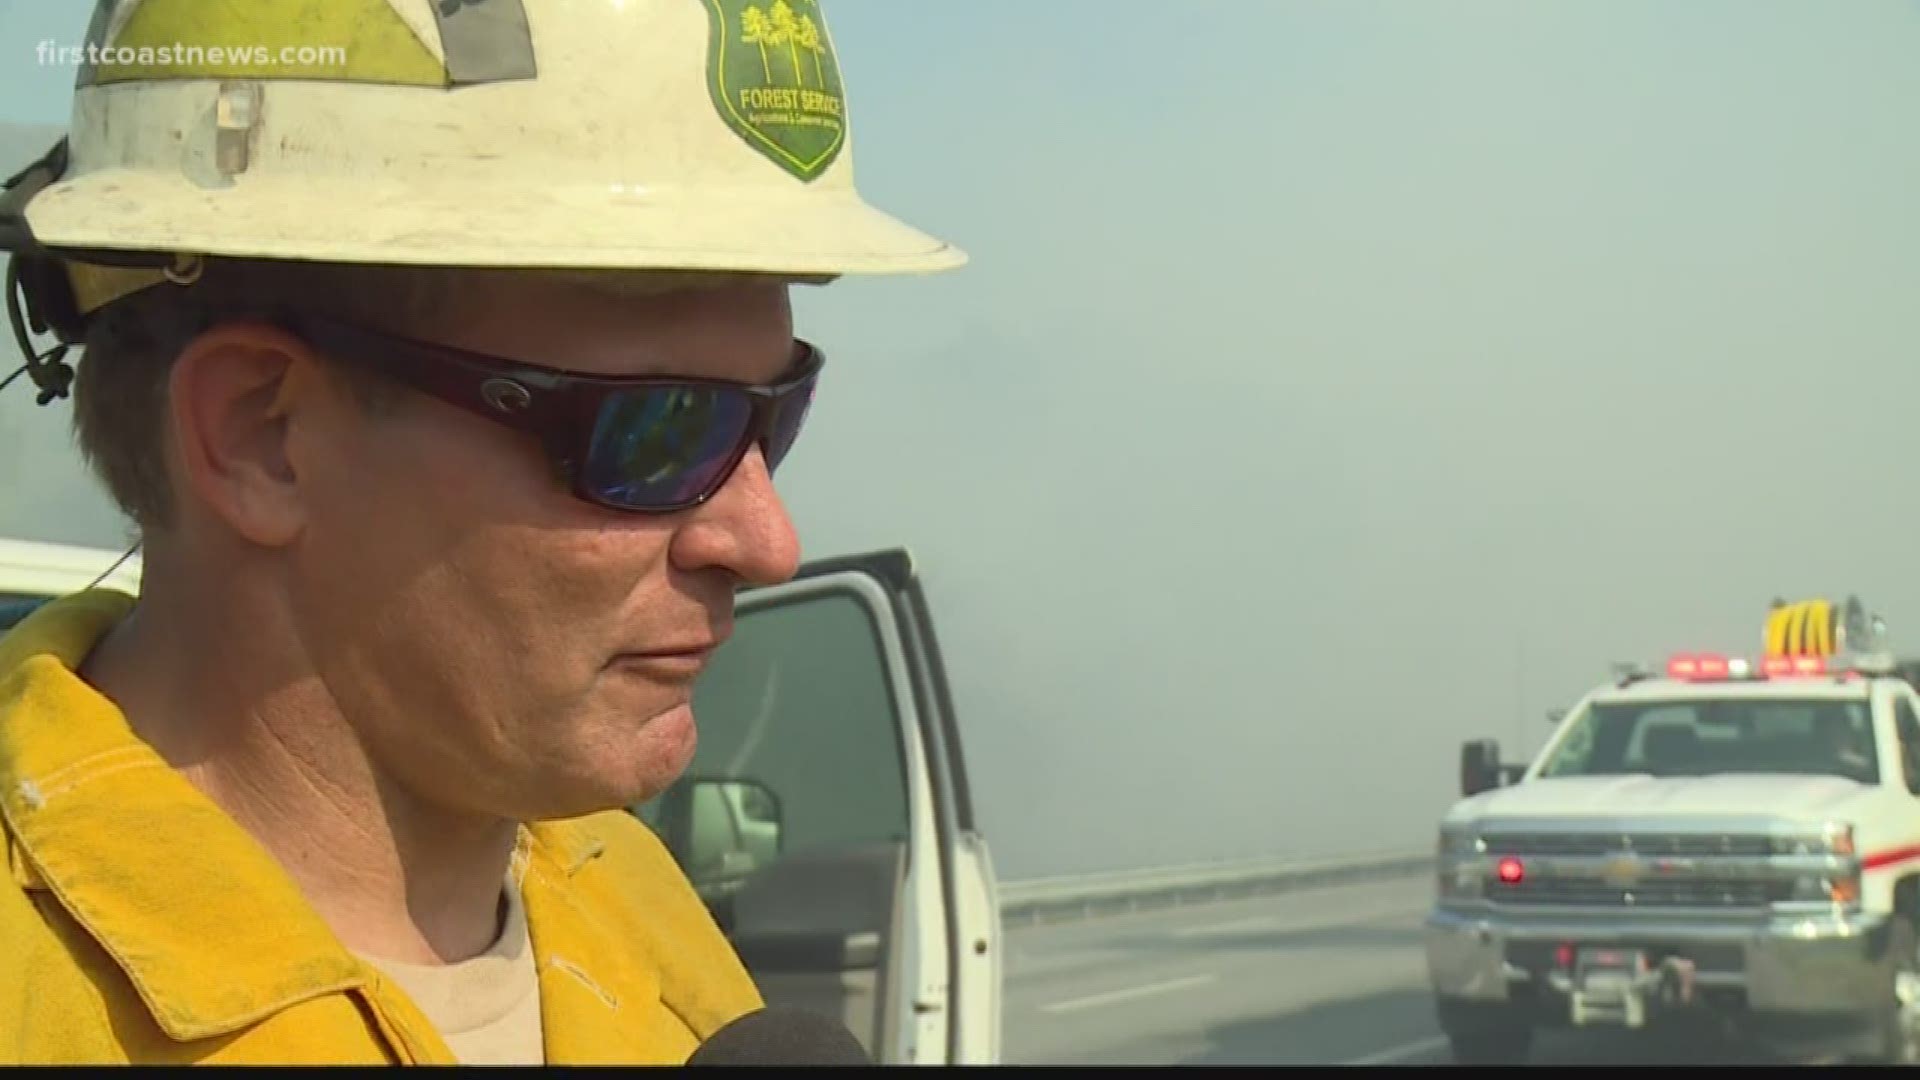 The fire grew to 600 acres Friday afternoon and is 55 percent contained, according to the Florida Forest Service.